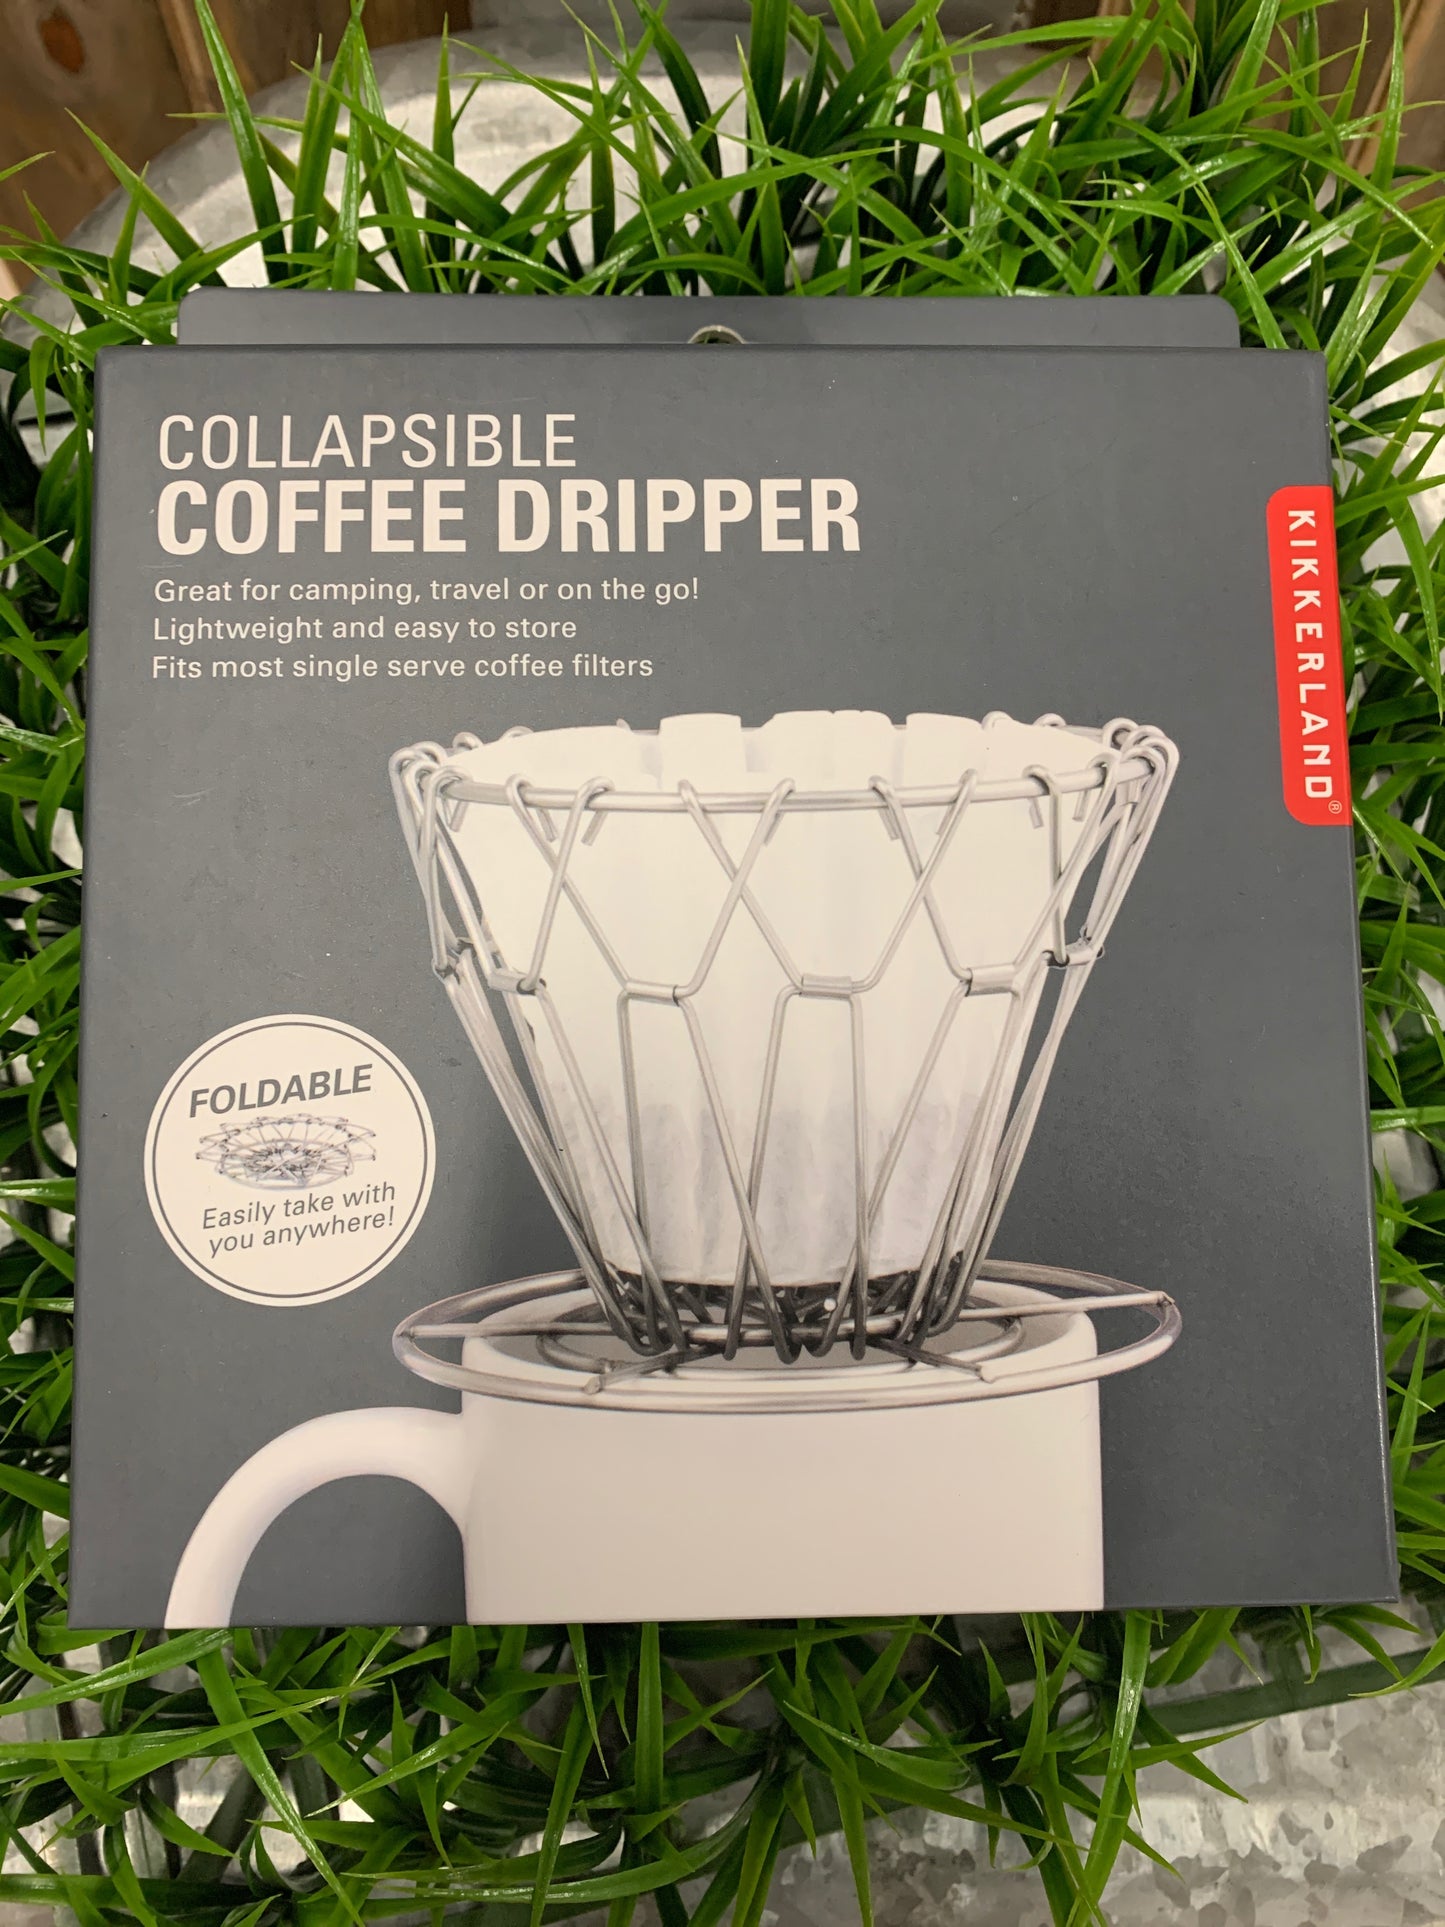 Aromatic pour over with no fuss. Easy to fold and store, fits any paper filter. Great for storage and on the go.      Works with paper filters of any size     Collapsible for easy storage     2.73"Dia. x 8.74"H